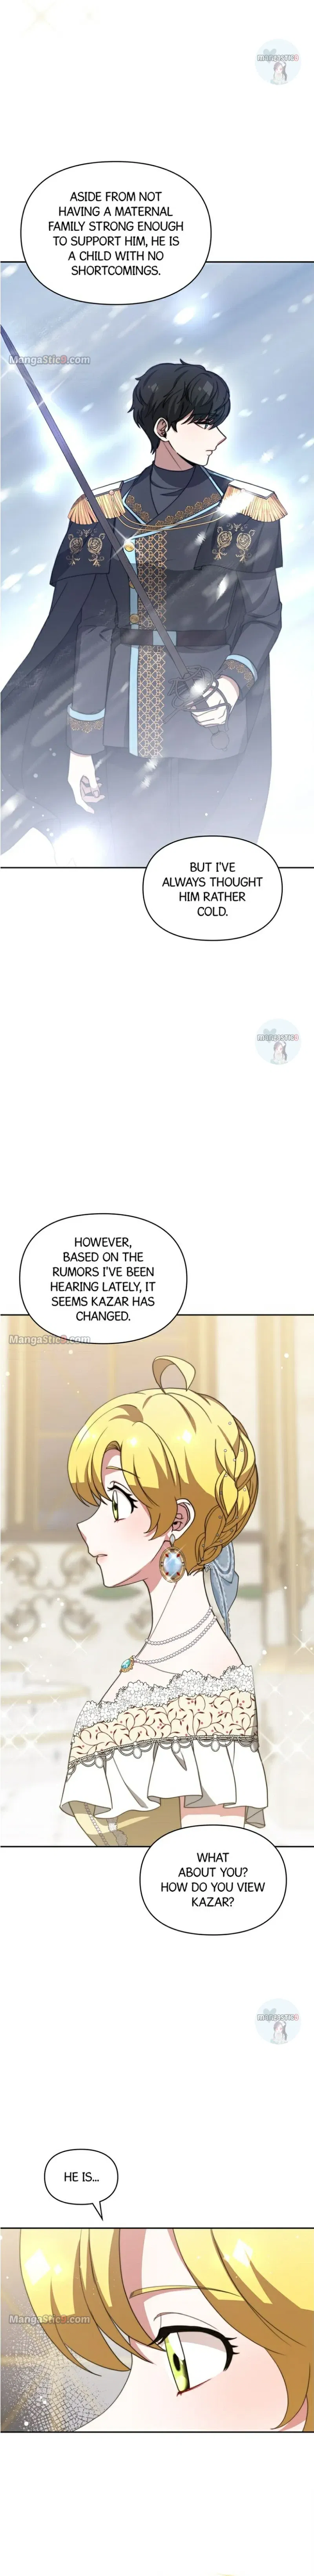 The Forgotten Princess Wants To Live In Peace Chapter 68 page 3